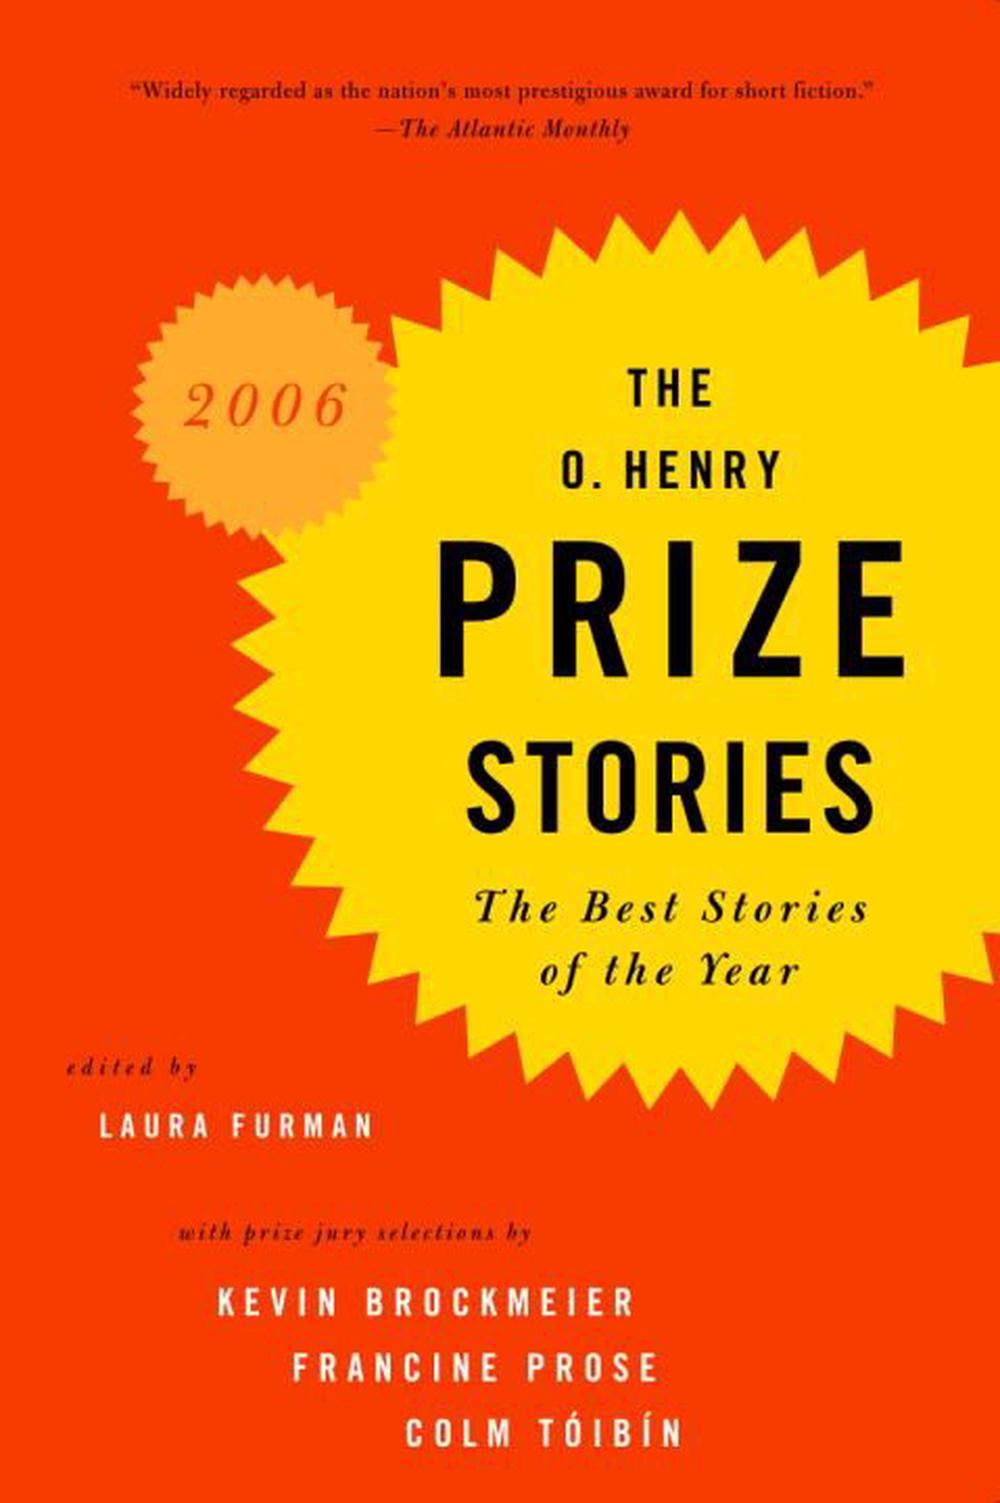 The O. Henry Prize Stories by Laura Furman, Paperback, 9781400095391